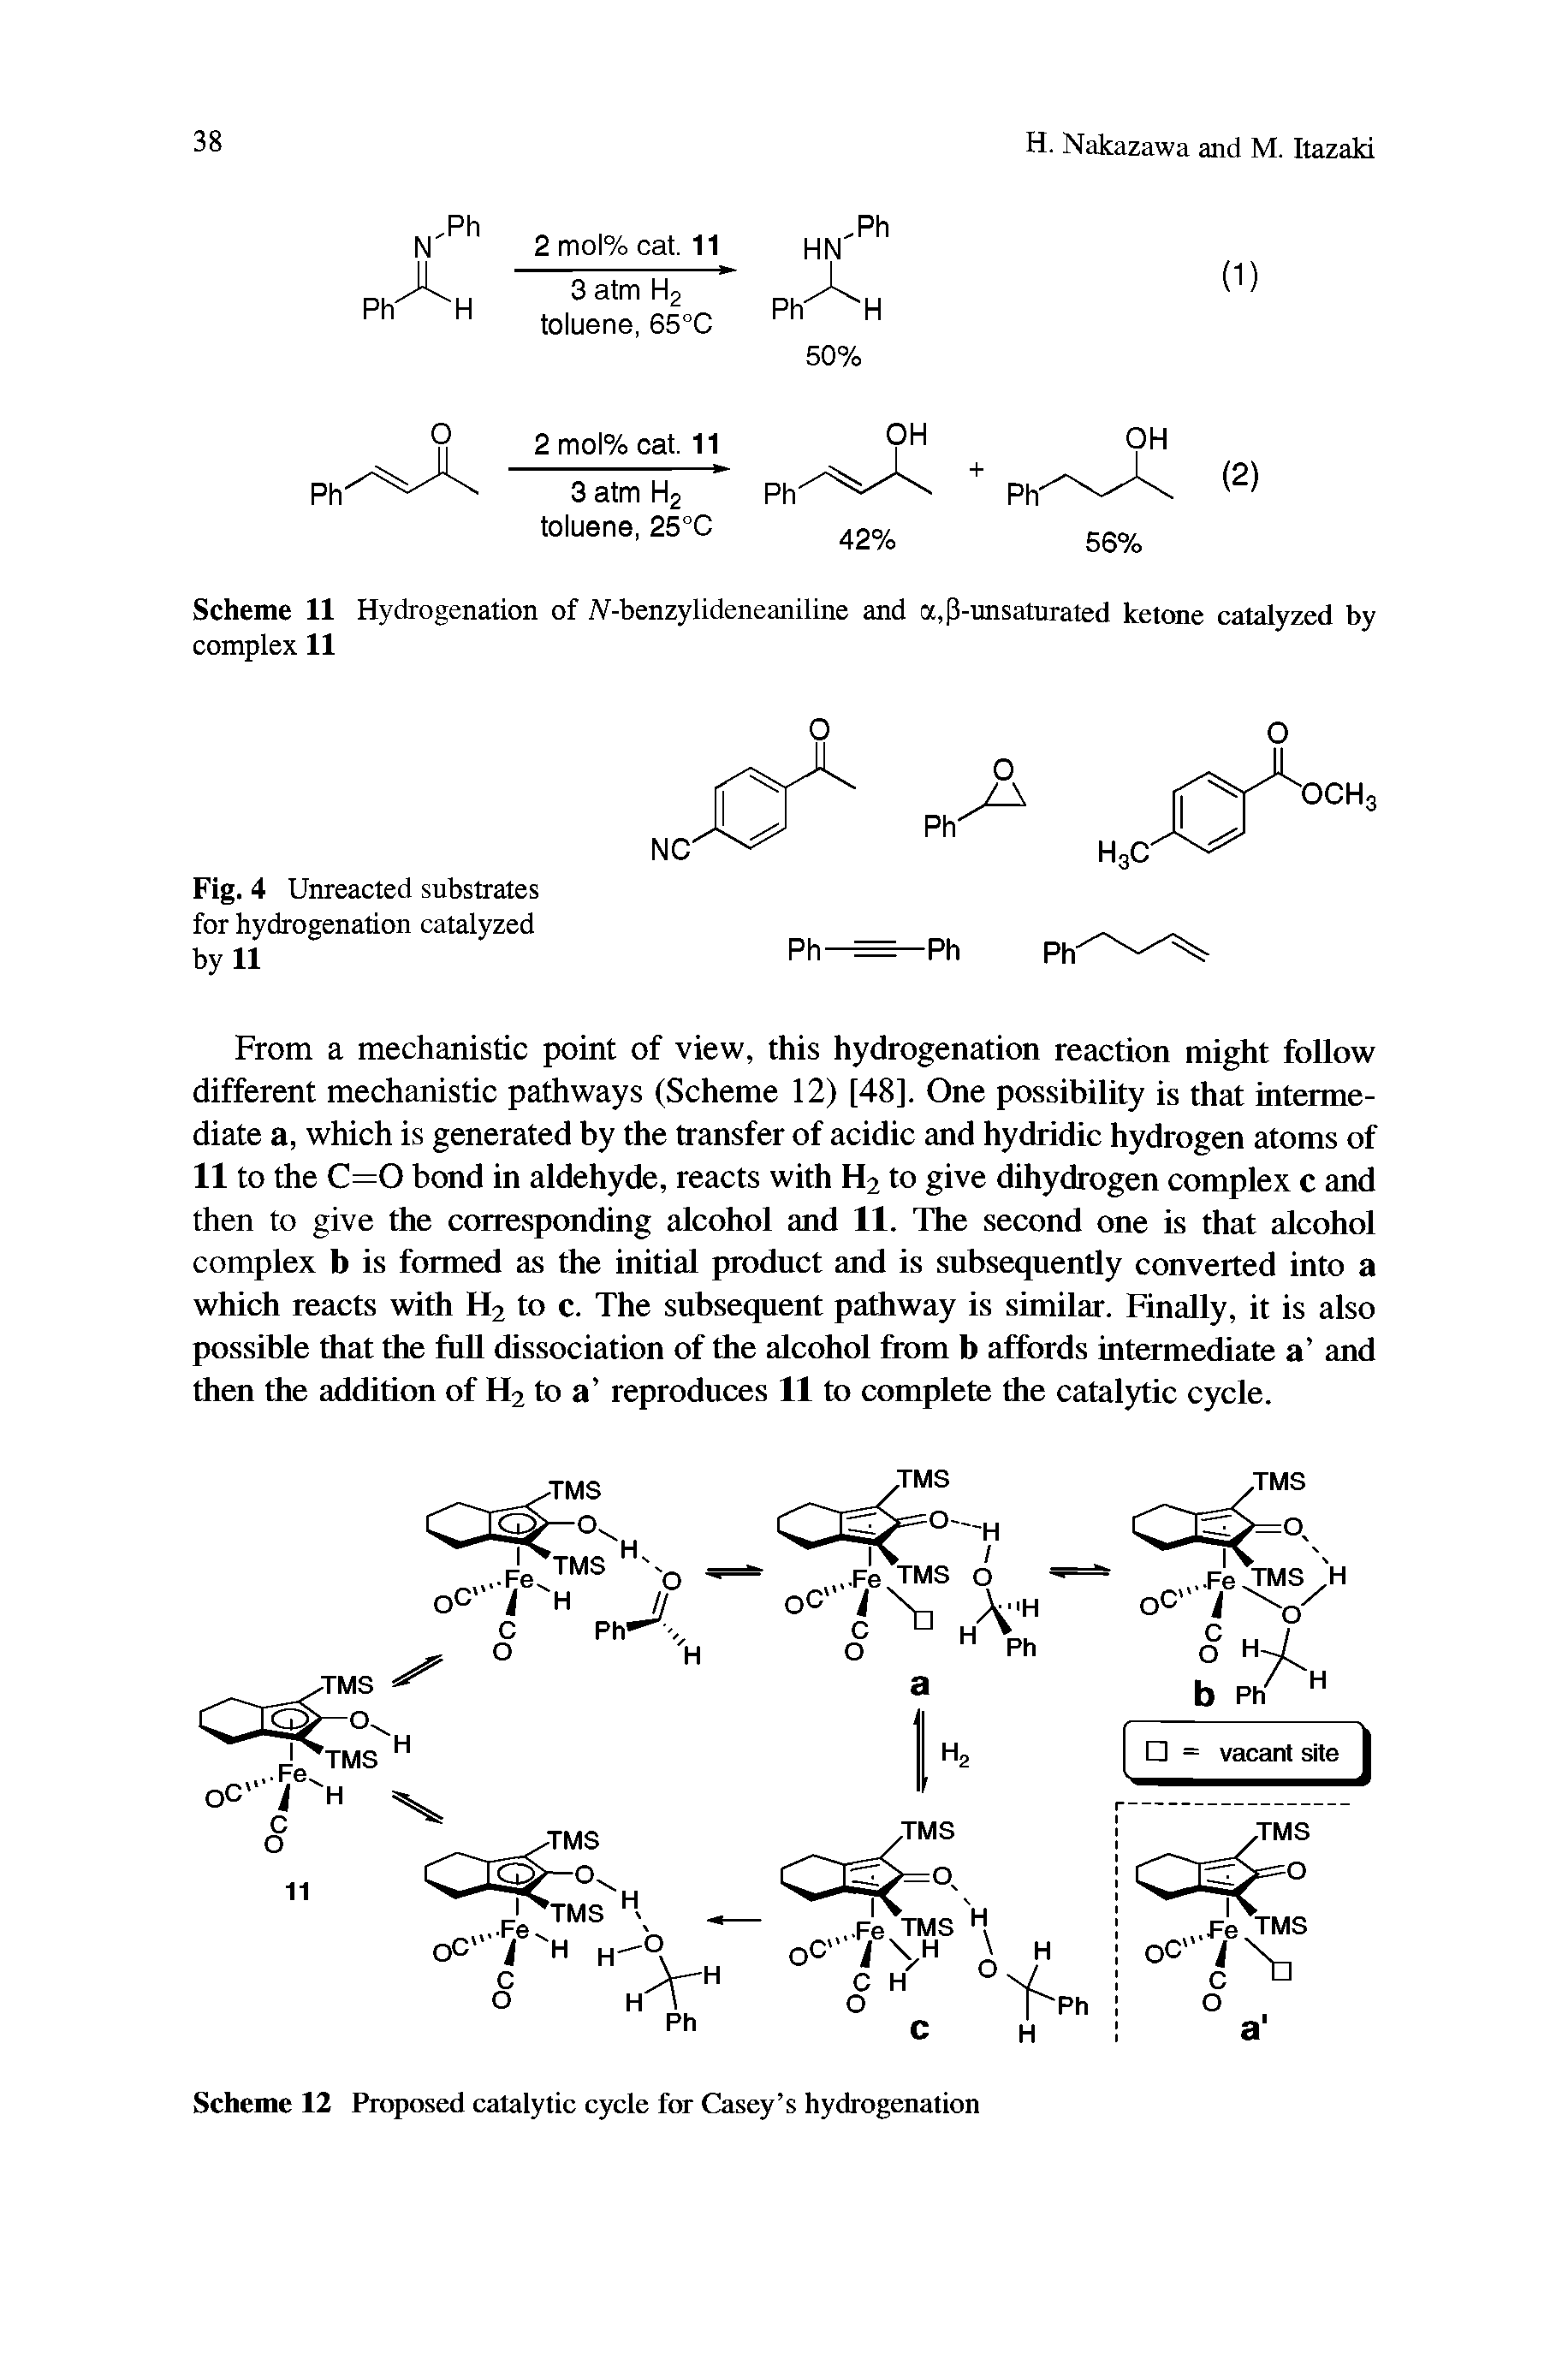 Scheme 11 Hydrogenation of At-benzylideneaniline and a,(3-unsaturated ketone catalyzed by complex 11...